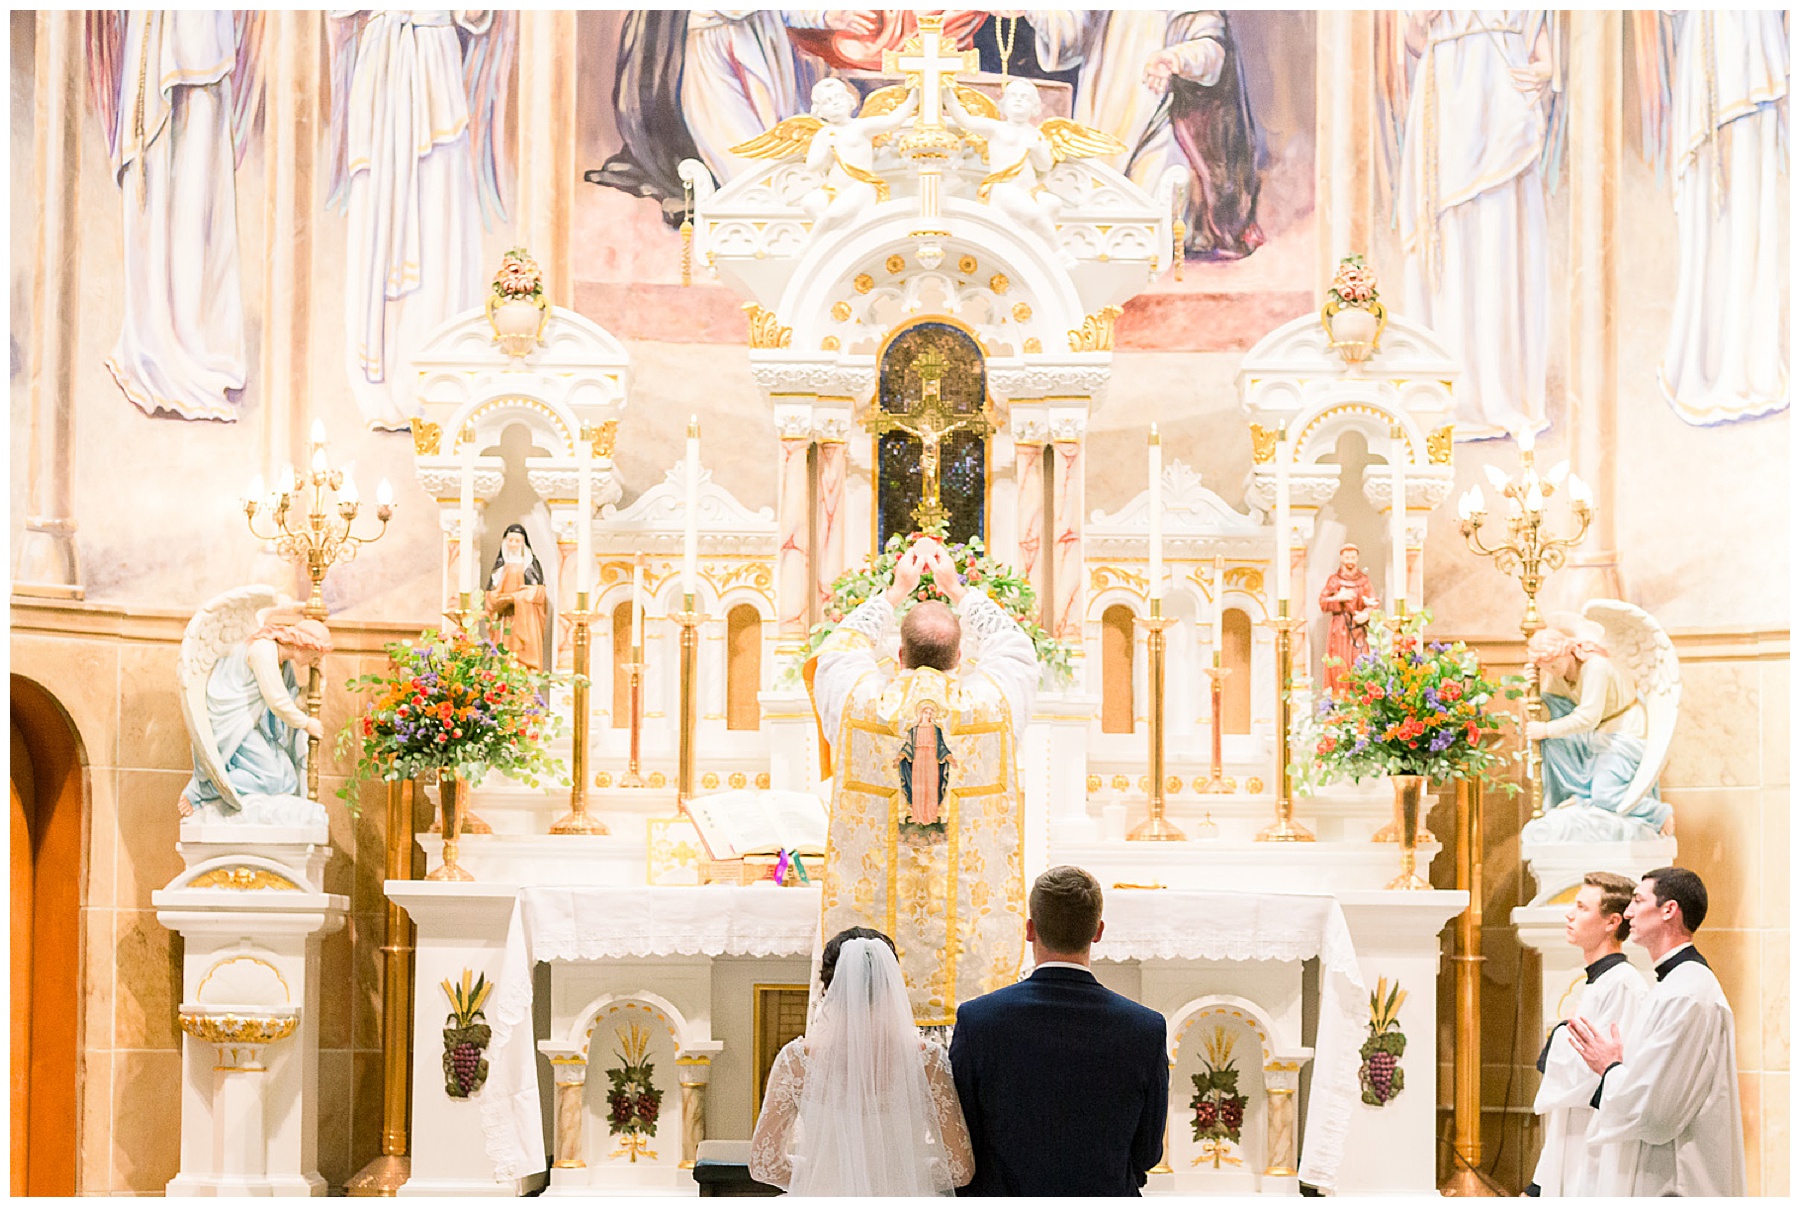 consecration-photograph-at-catholic-wedding-mass-with-bride-and-groom-our-lady-of-the-holy-rosary-catholic-church-in-indianapolis-indiana